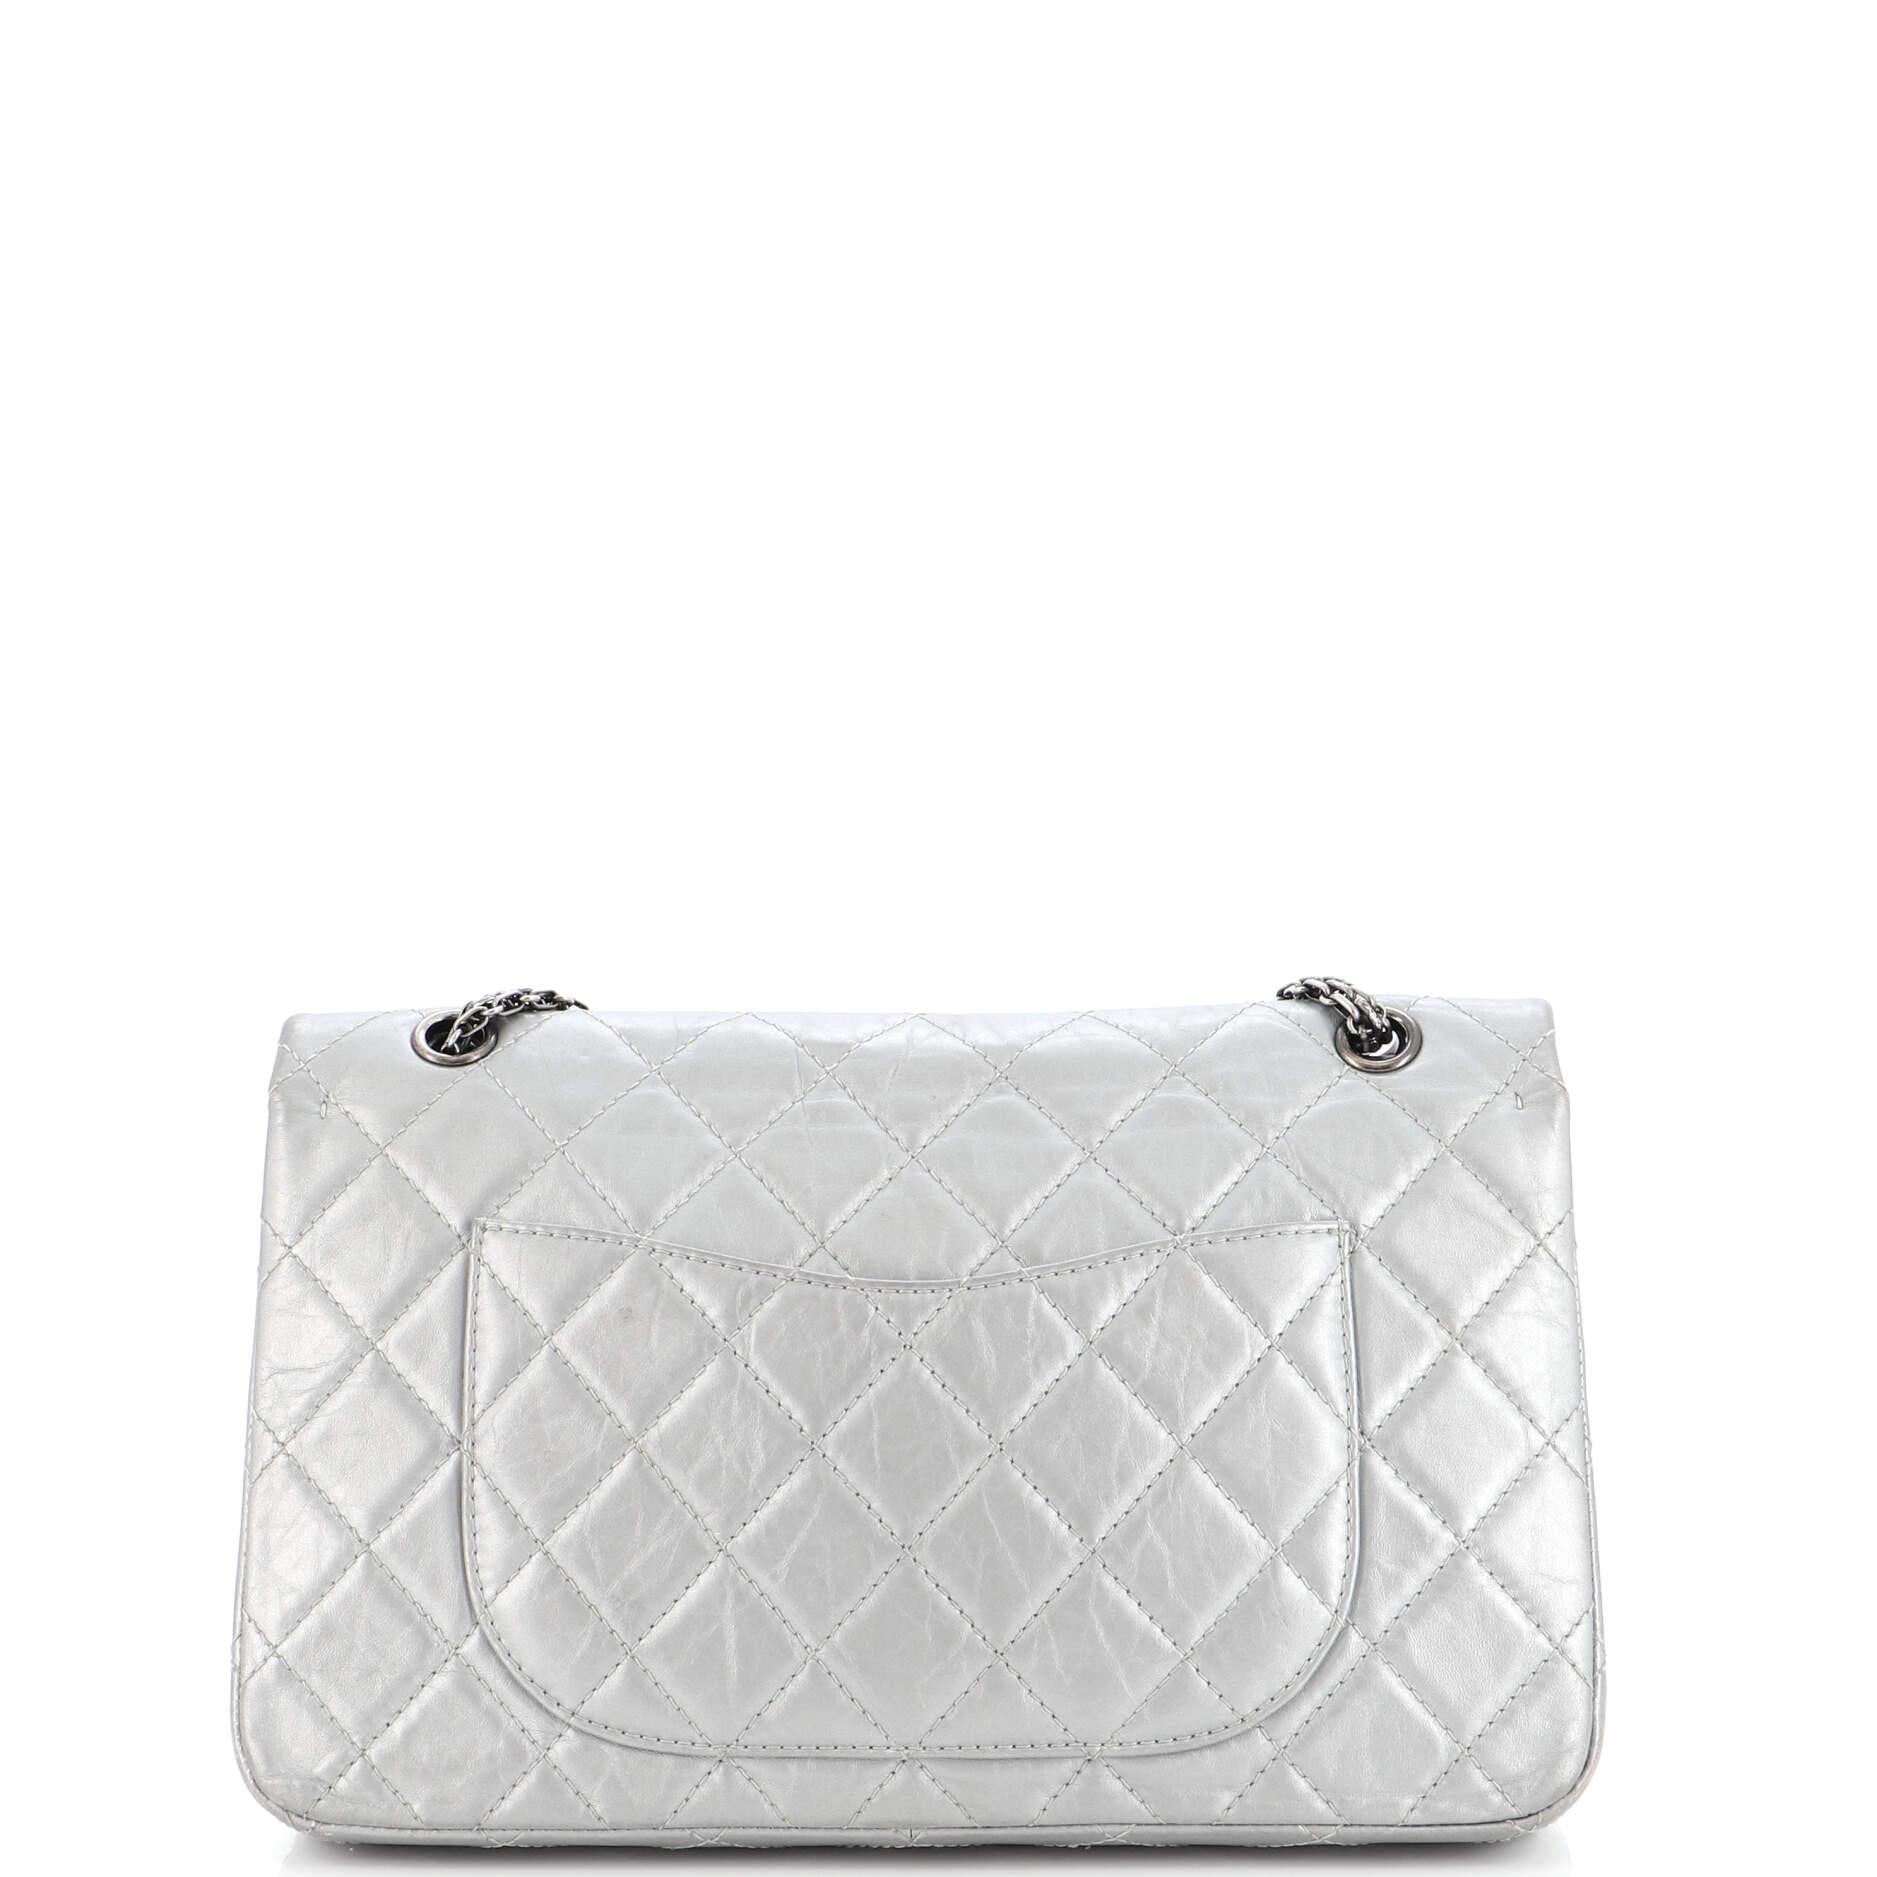 Women's or Men's Chanel Reissue 2.55 Flap Bag Quilted Aged Calfskin 227